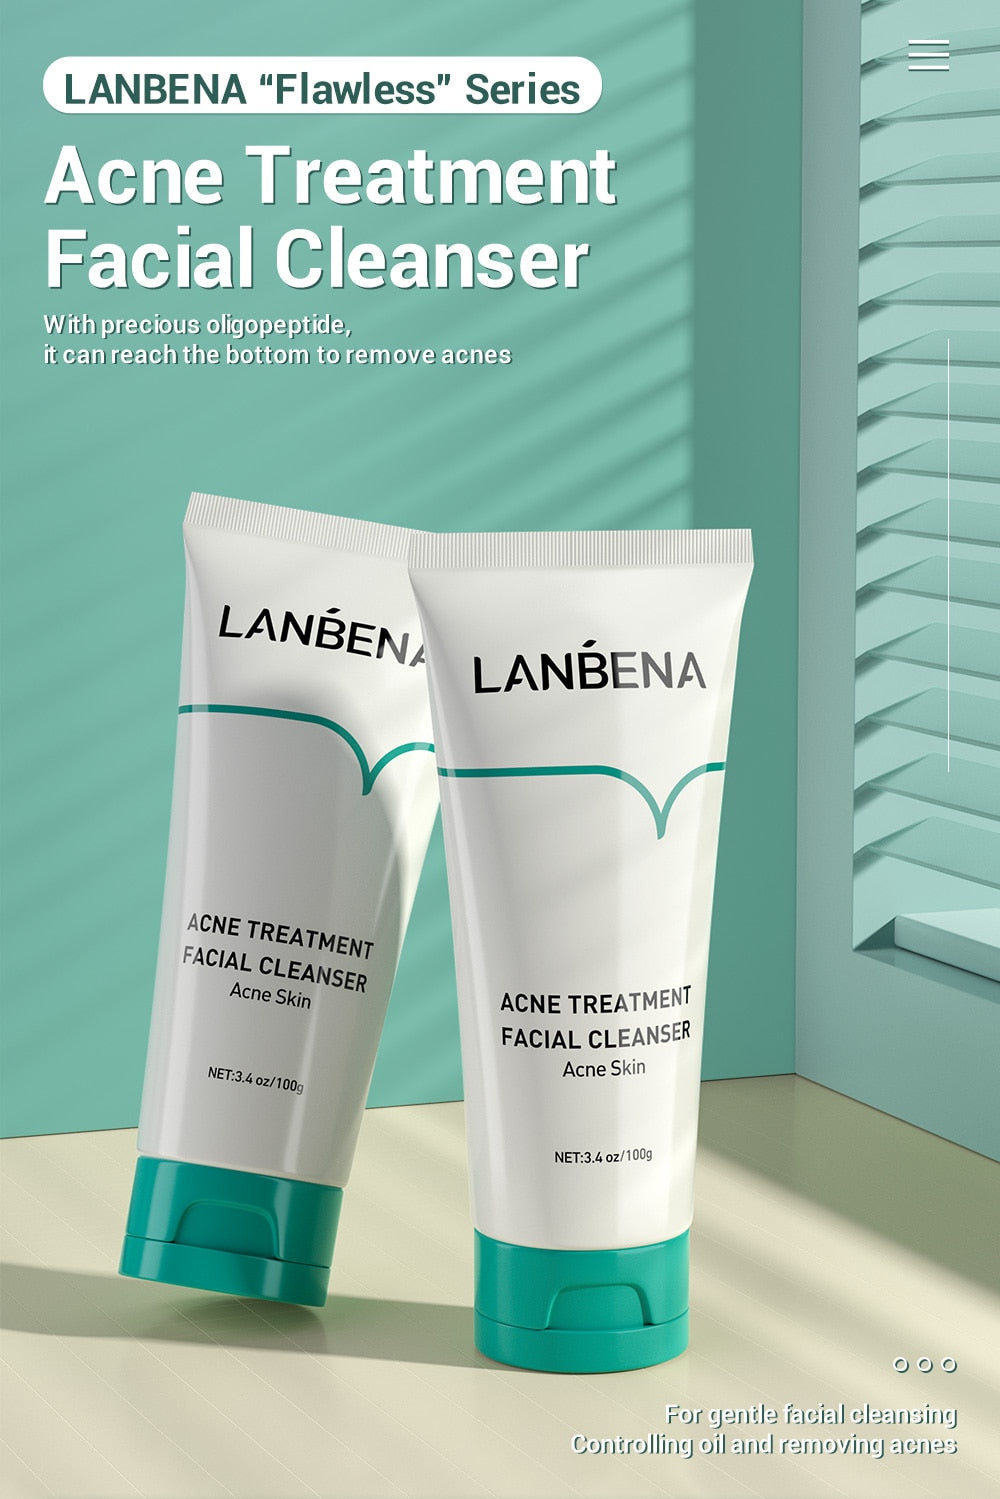 Metacnbeauty Sample  Facial Cleanser Acne Treatment